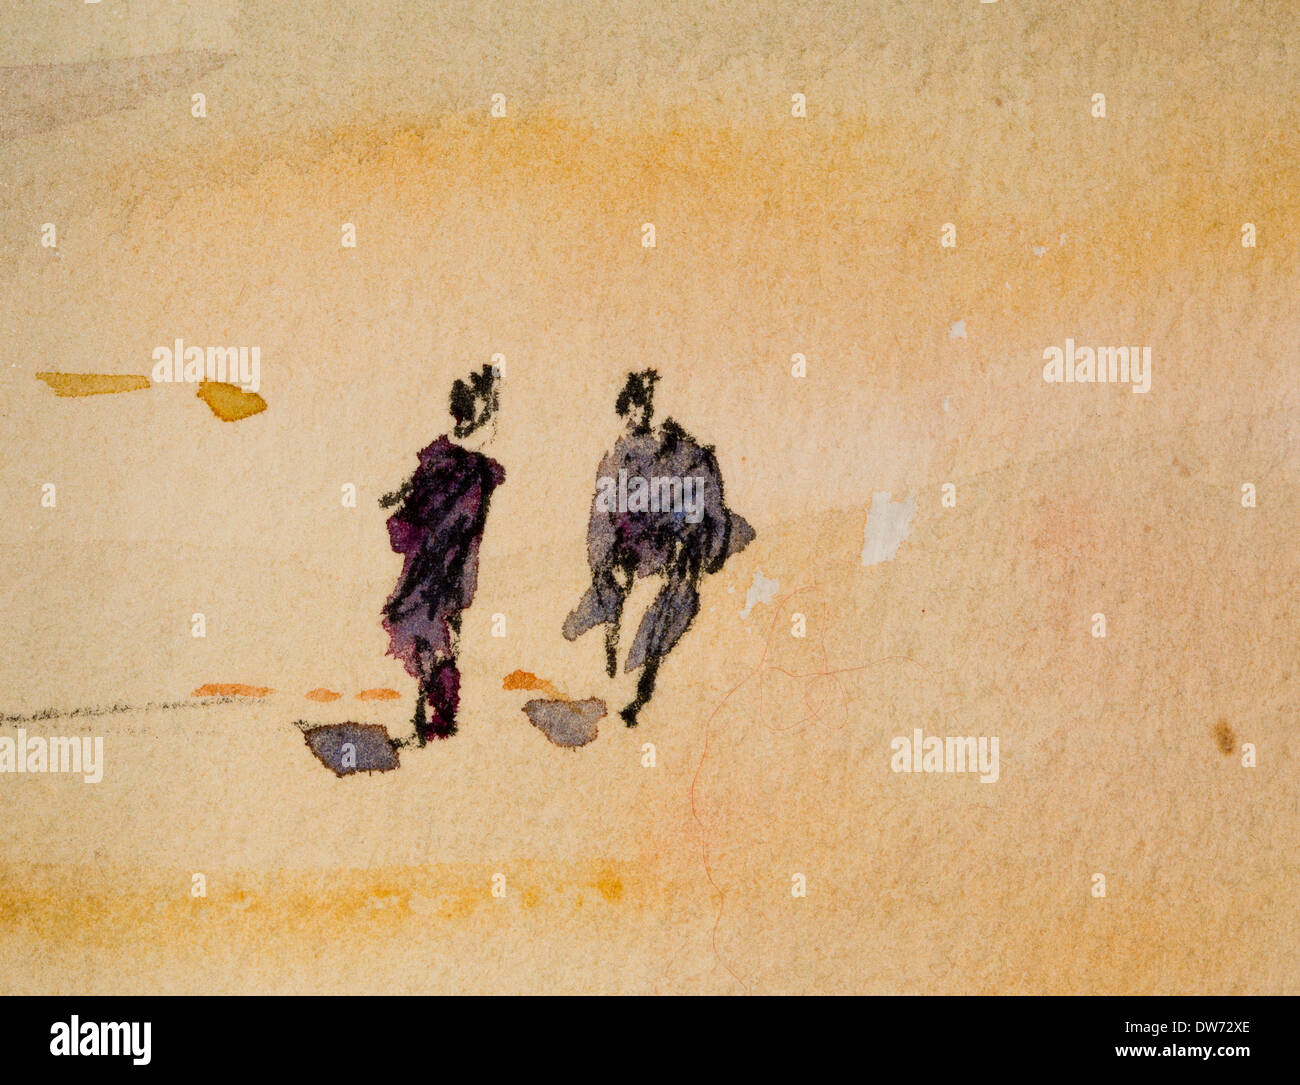 Detail of a watercolour painting of two tiny figures on a sunny beach illustrating economy of brushwork Stock Photo